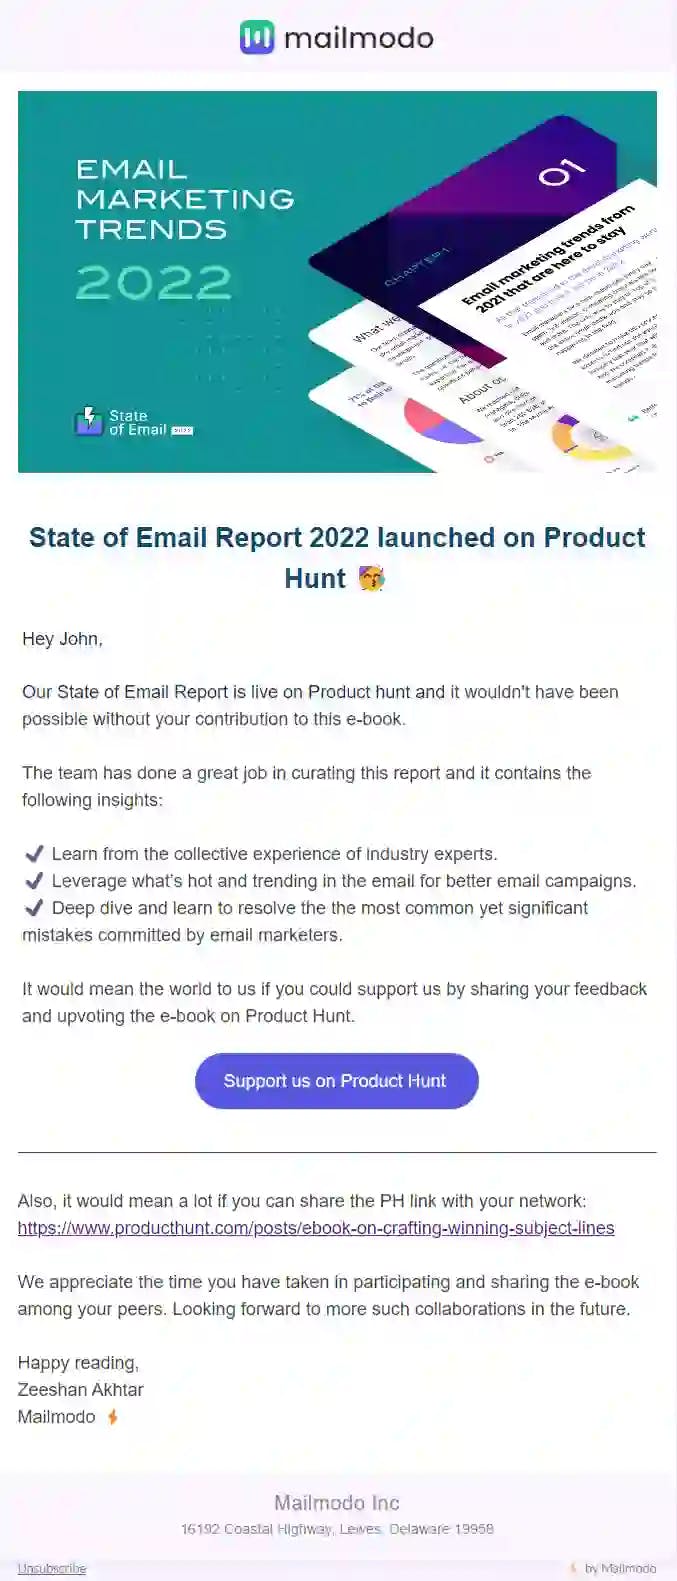 Free Product Hunt E-Book Launch Email Template